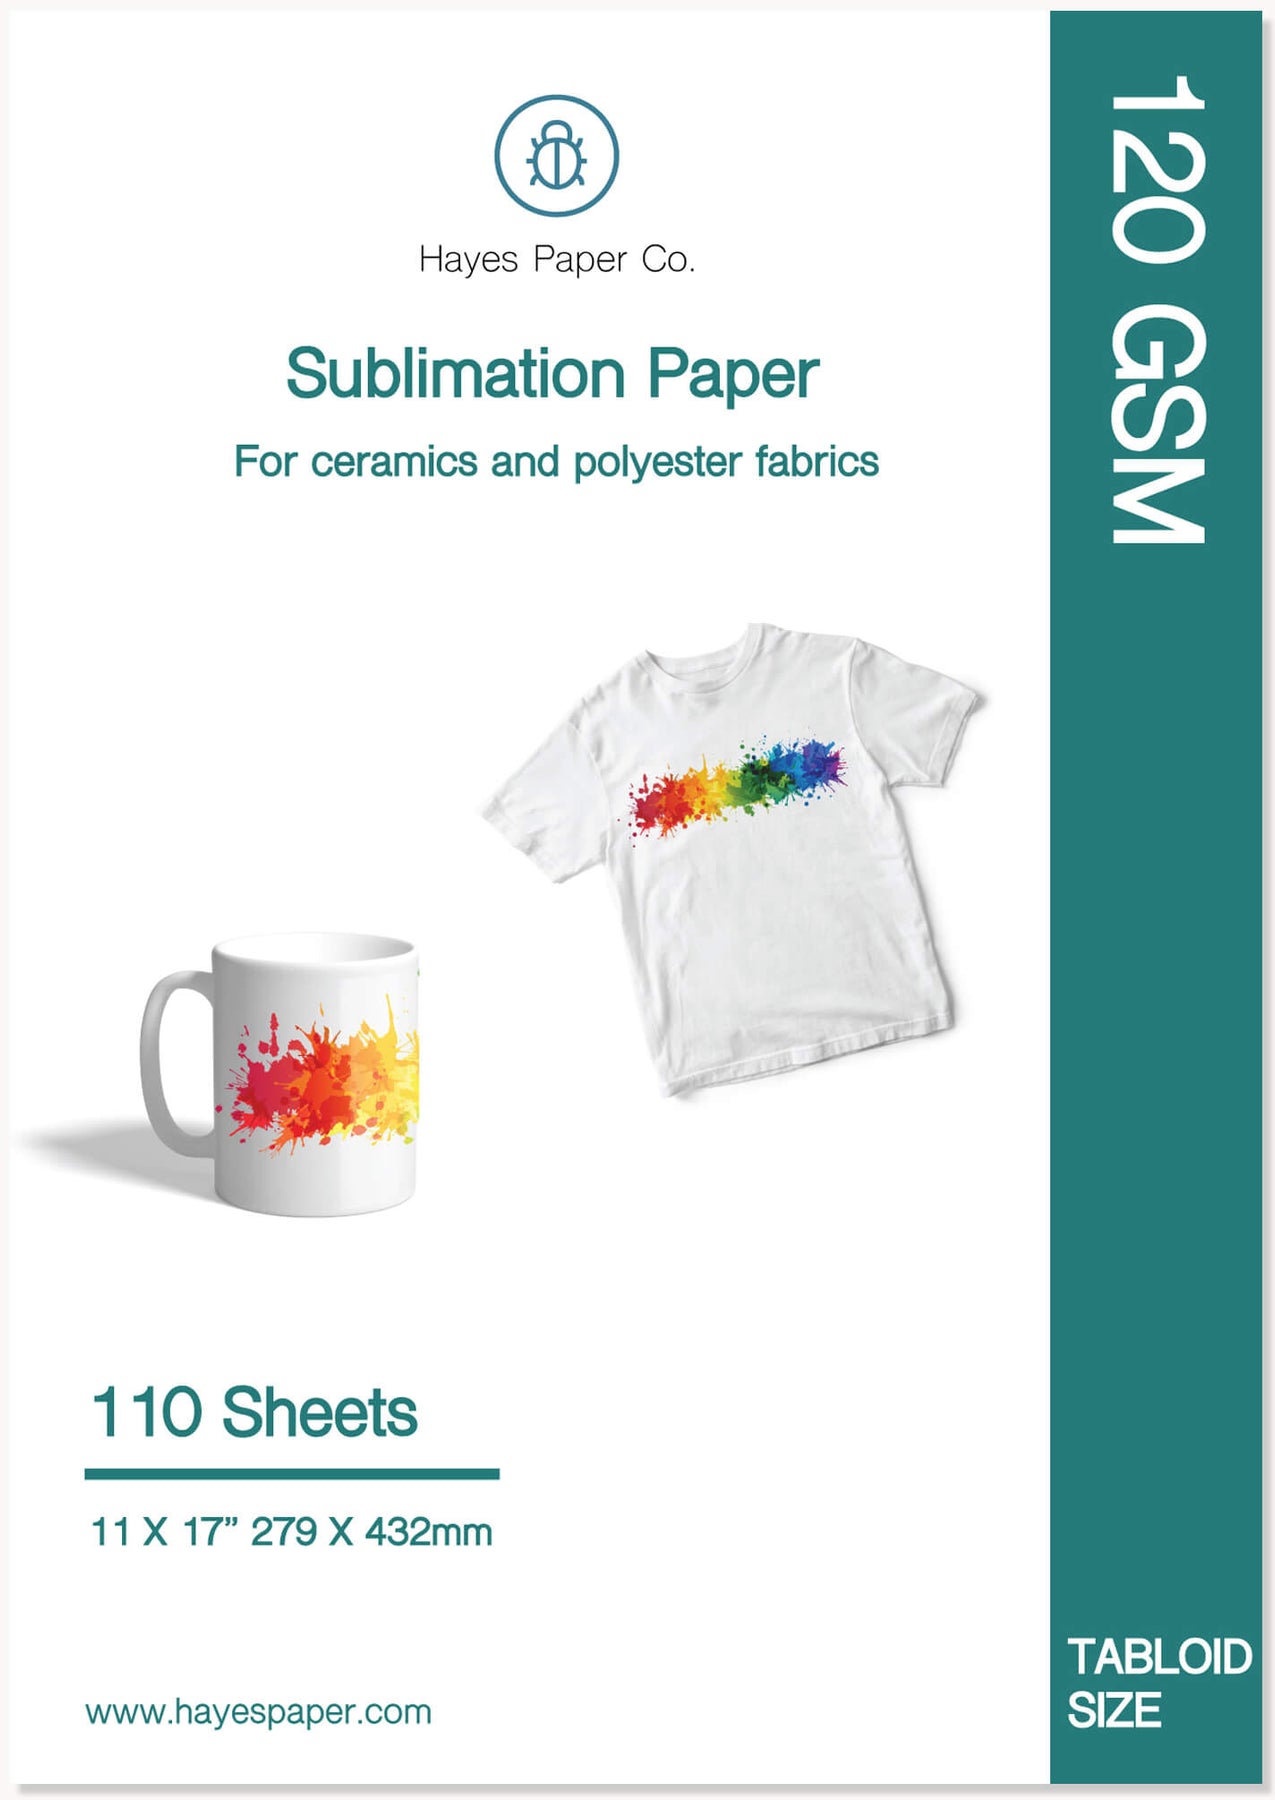 Strong Ink Absorption 120G Sublimation Transfer Paper Produced By A-SUB®